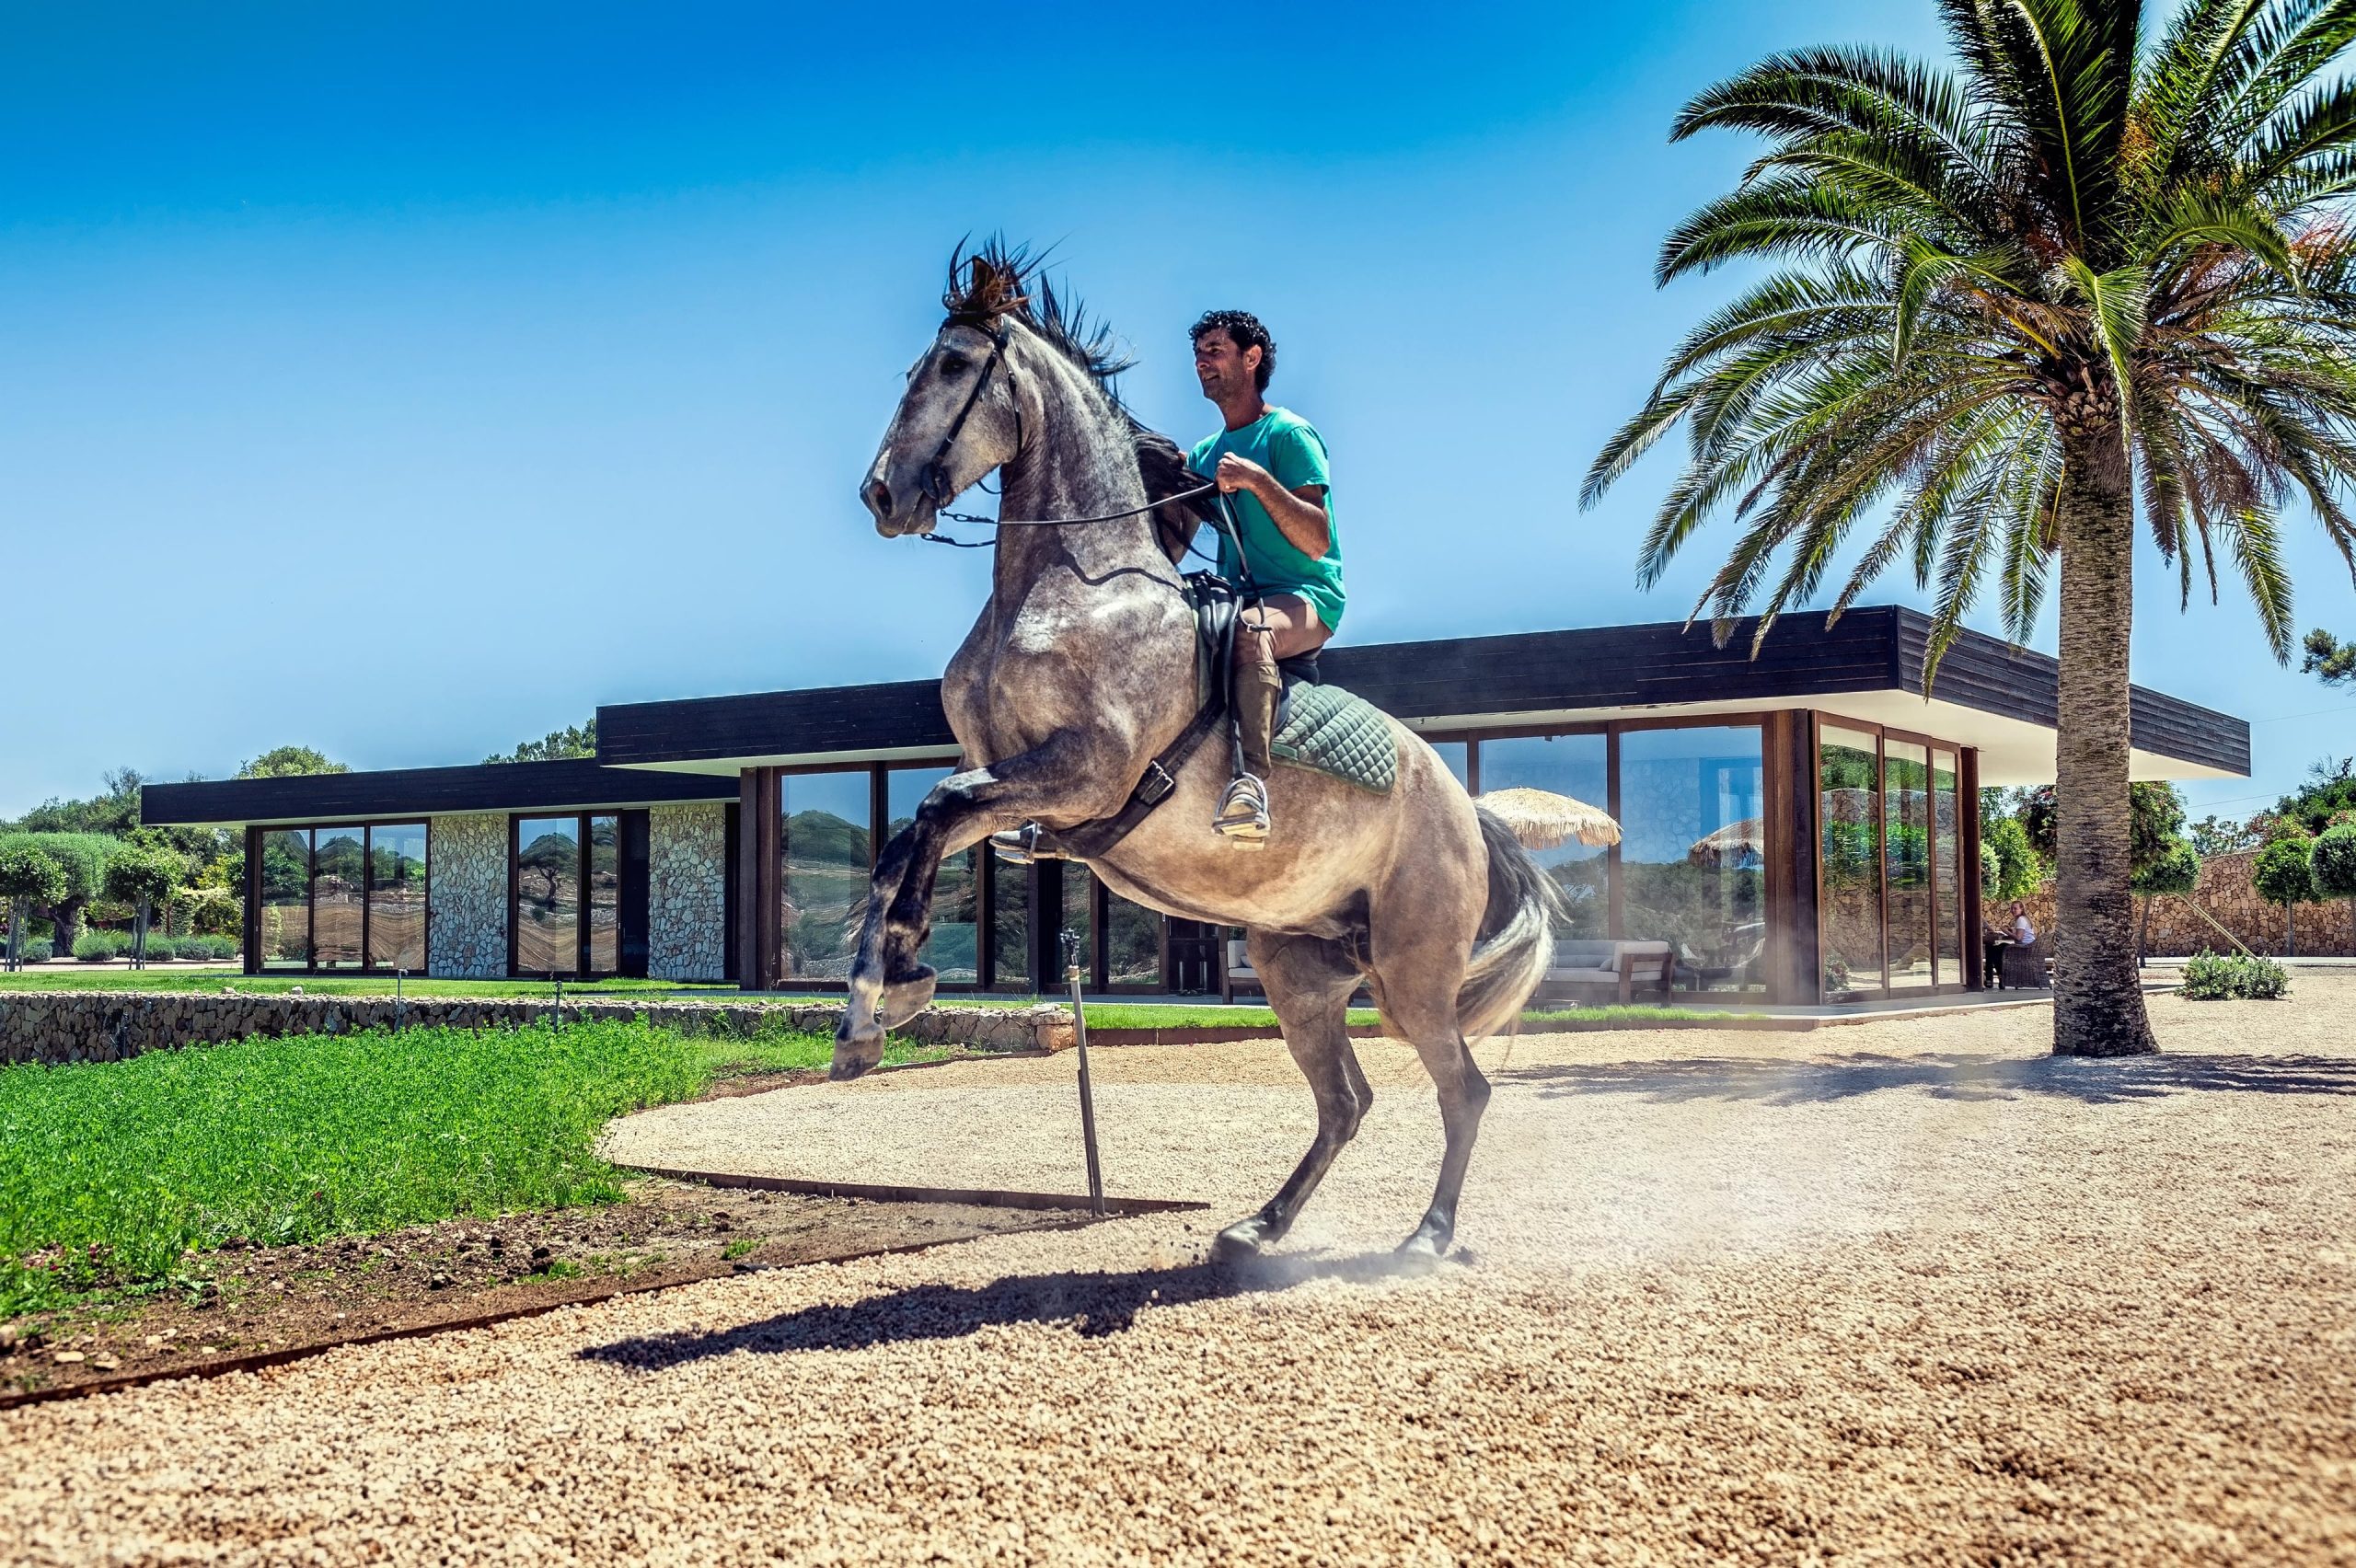 A dynamic lifestyle shot captured by Wright Content, featuring a horse and rider in action. The stallion rears up on its hind legs, kicking up dust against the backdrop of a sleek glass-box modernist home and a towering palm tree